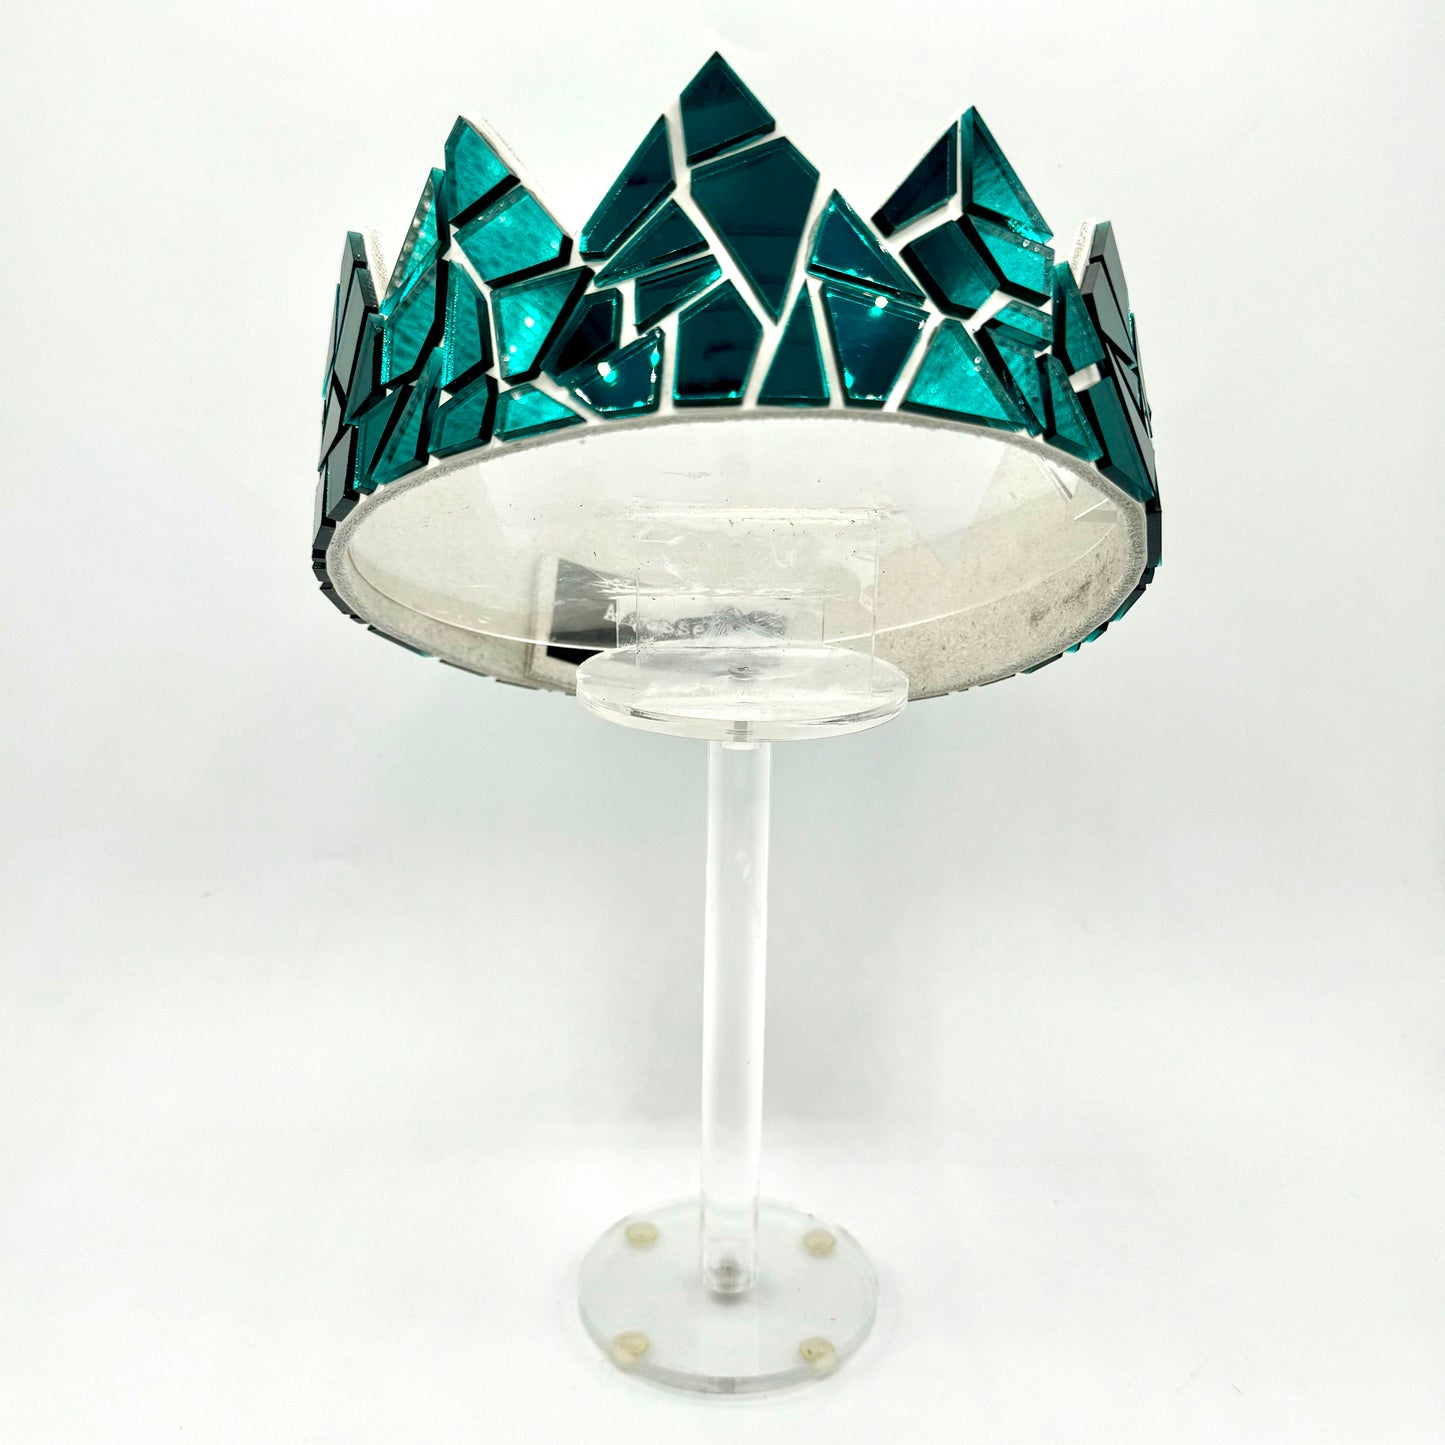 Teal and White Mirror Crown